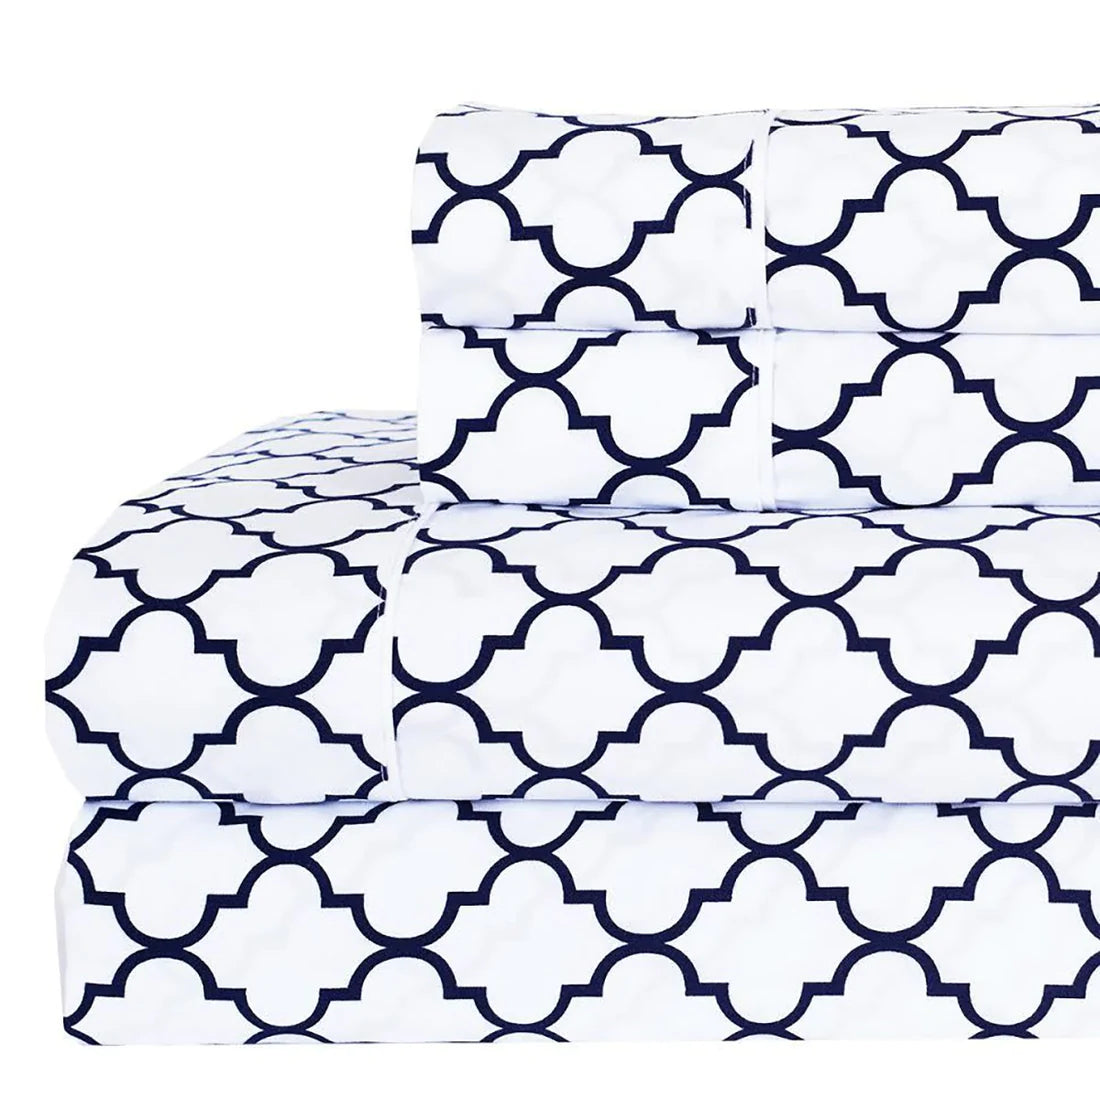 Buy Printed Meridian Percale White and Coral Combed Cotton Sheets at- Egyptianhomelinens.com